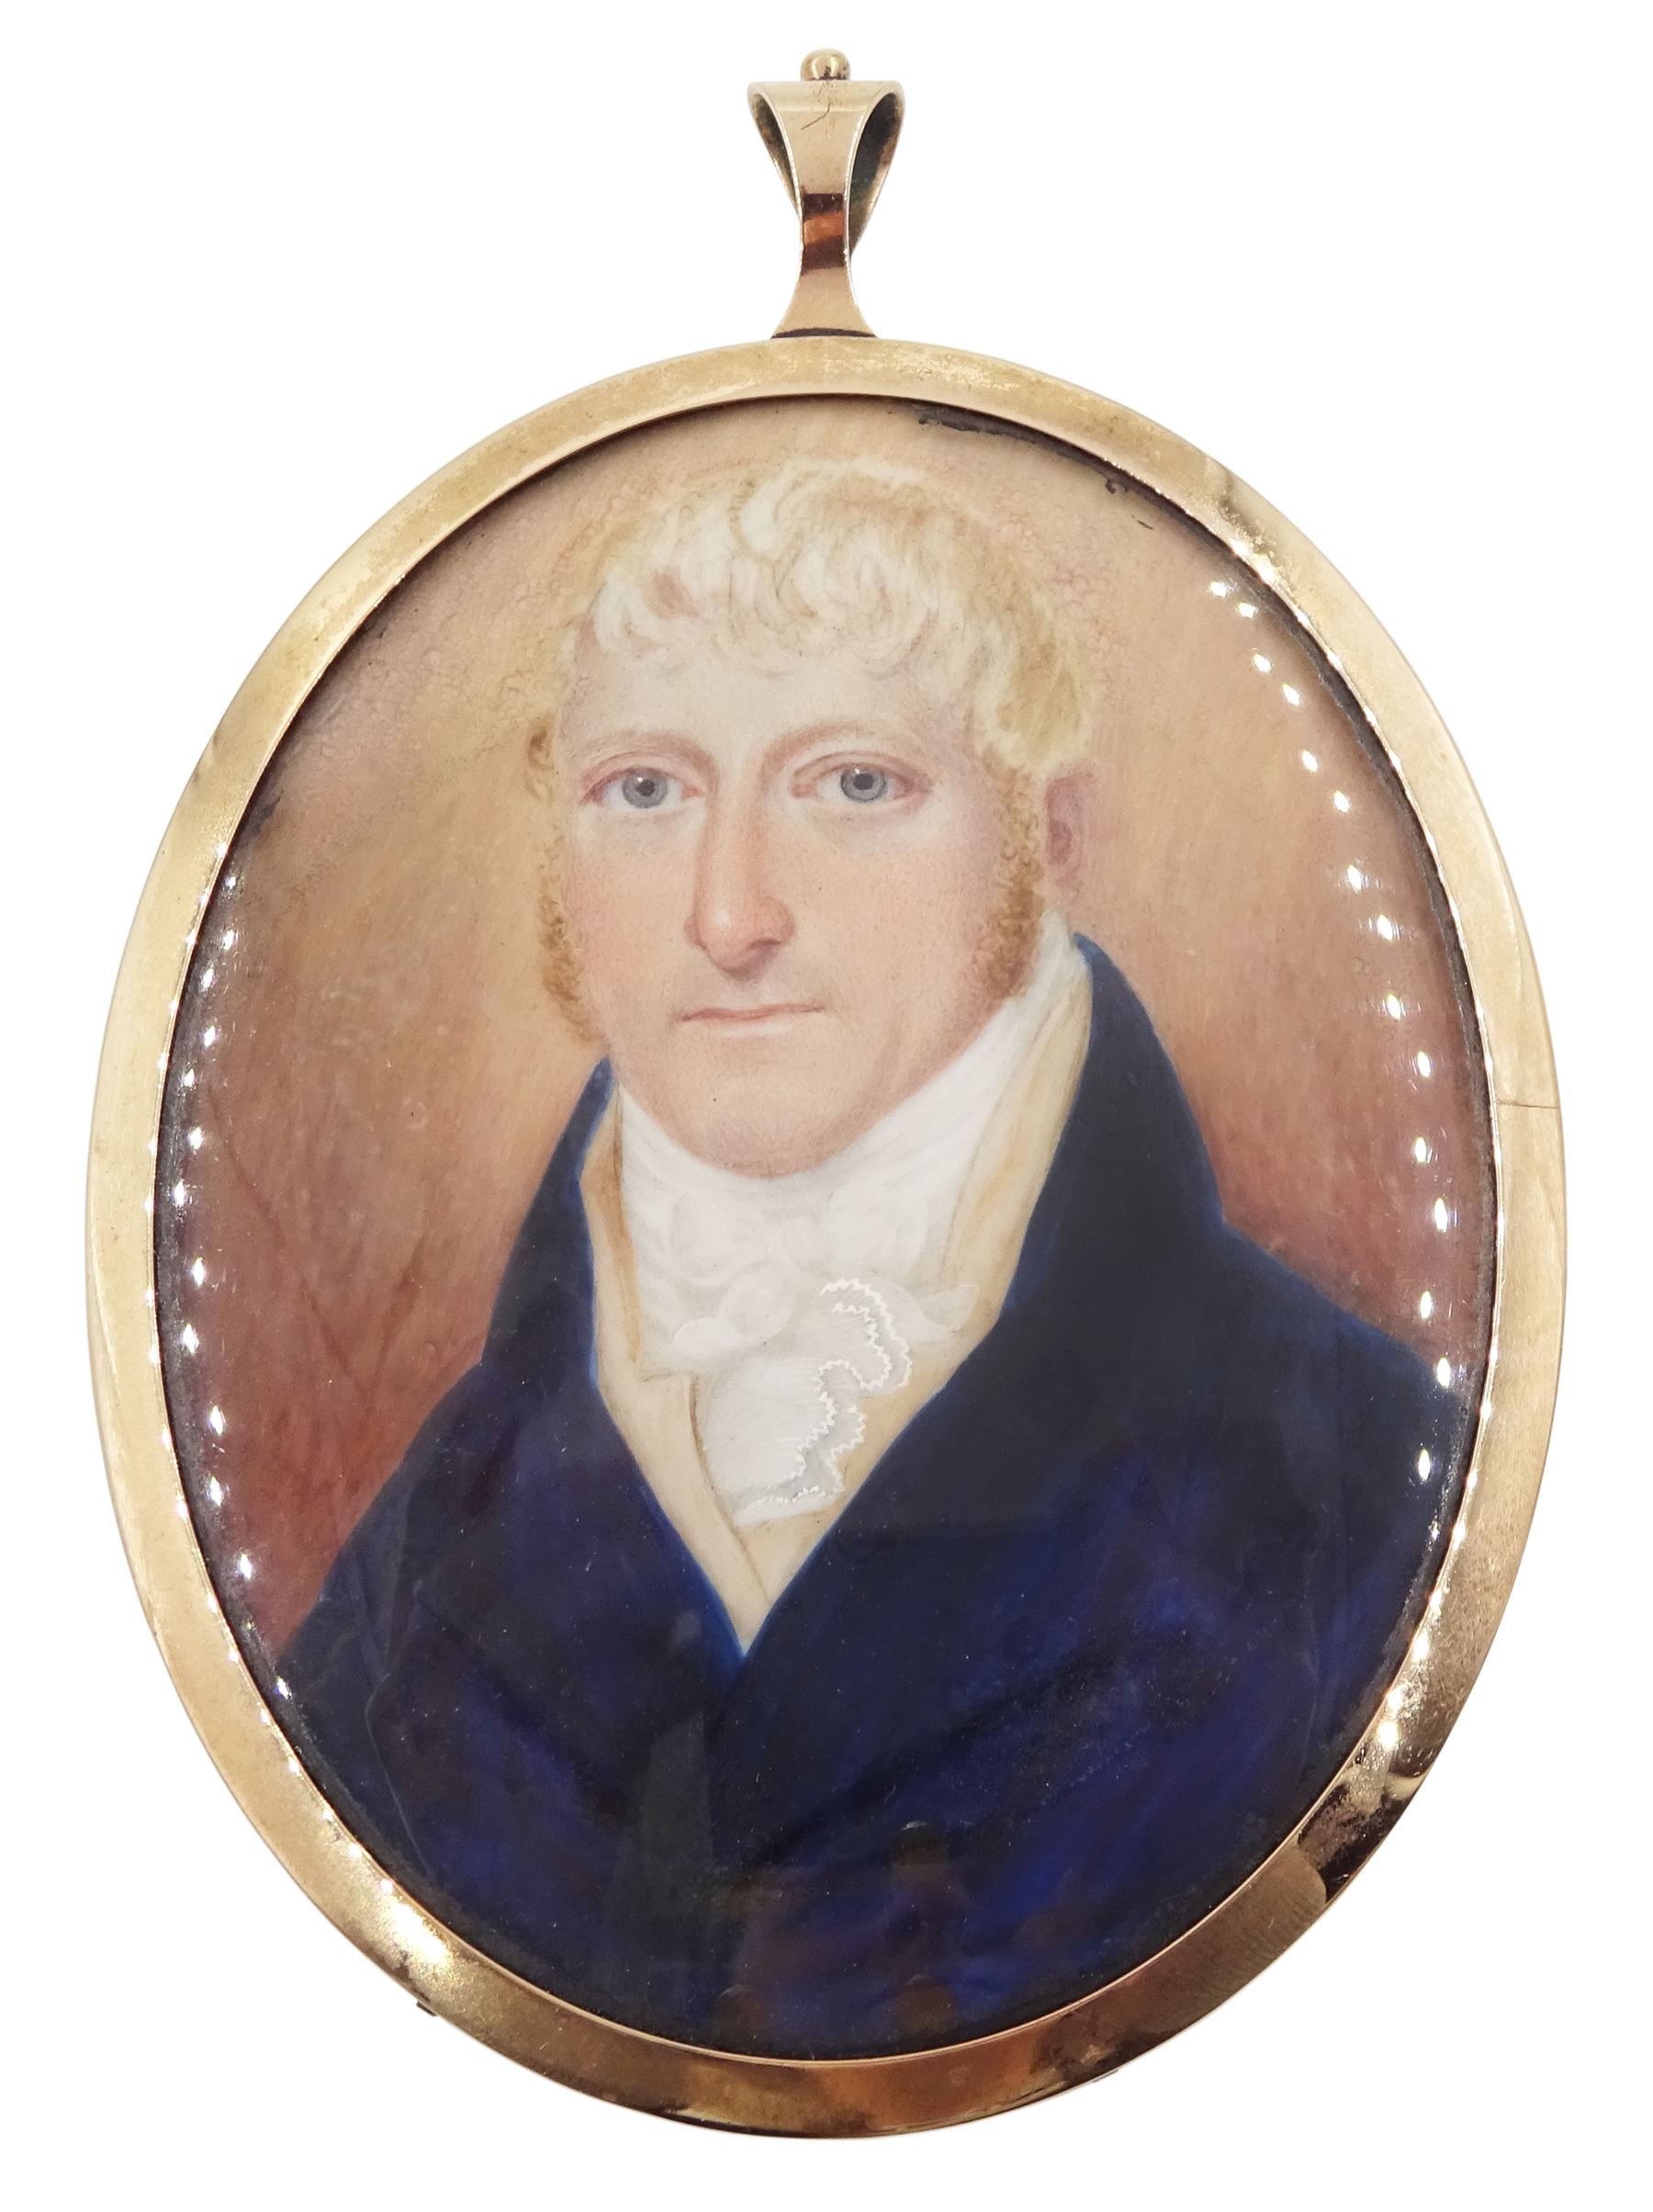 John Gatecliff (1771-1831) of Hull - Ship's Captain and latterly Commodore of the Humber Pilots - a